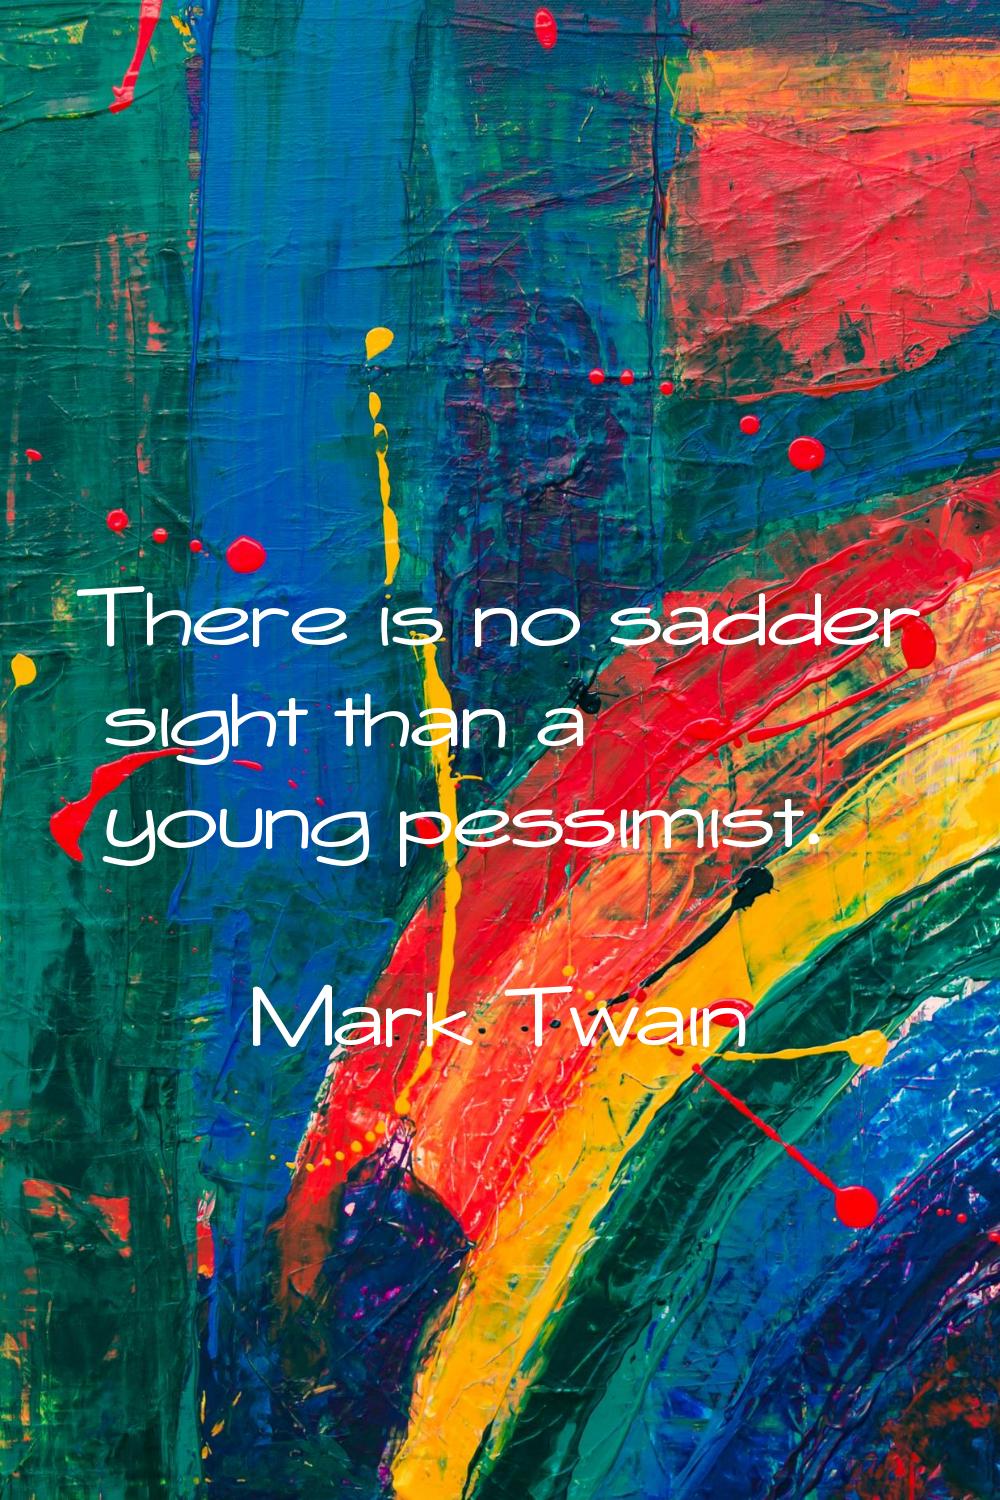 There is no sadder sight than a young pessimist.